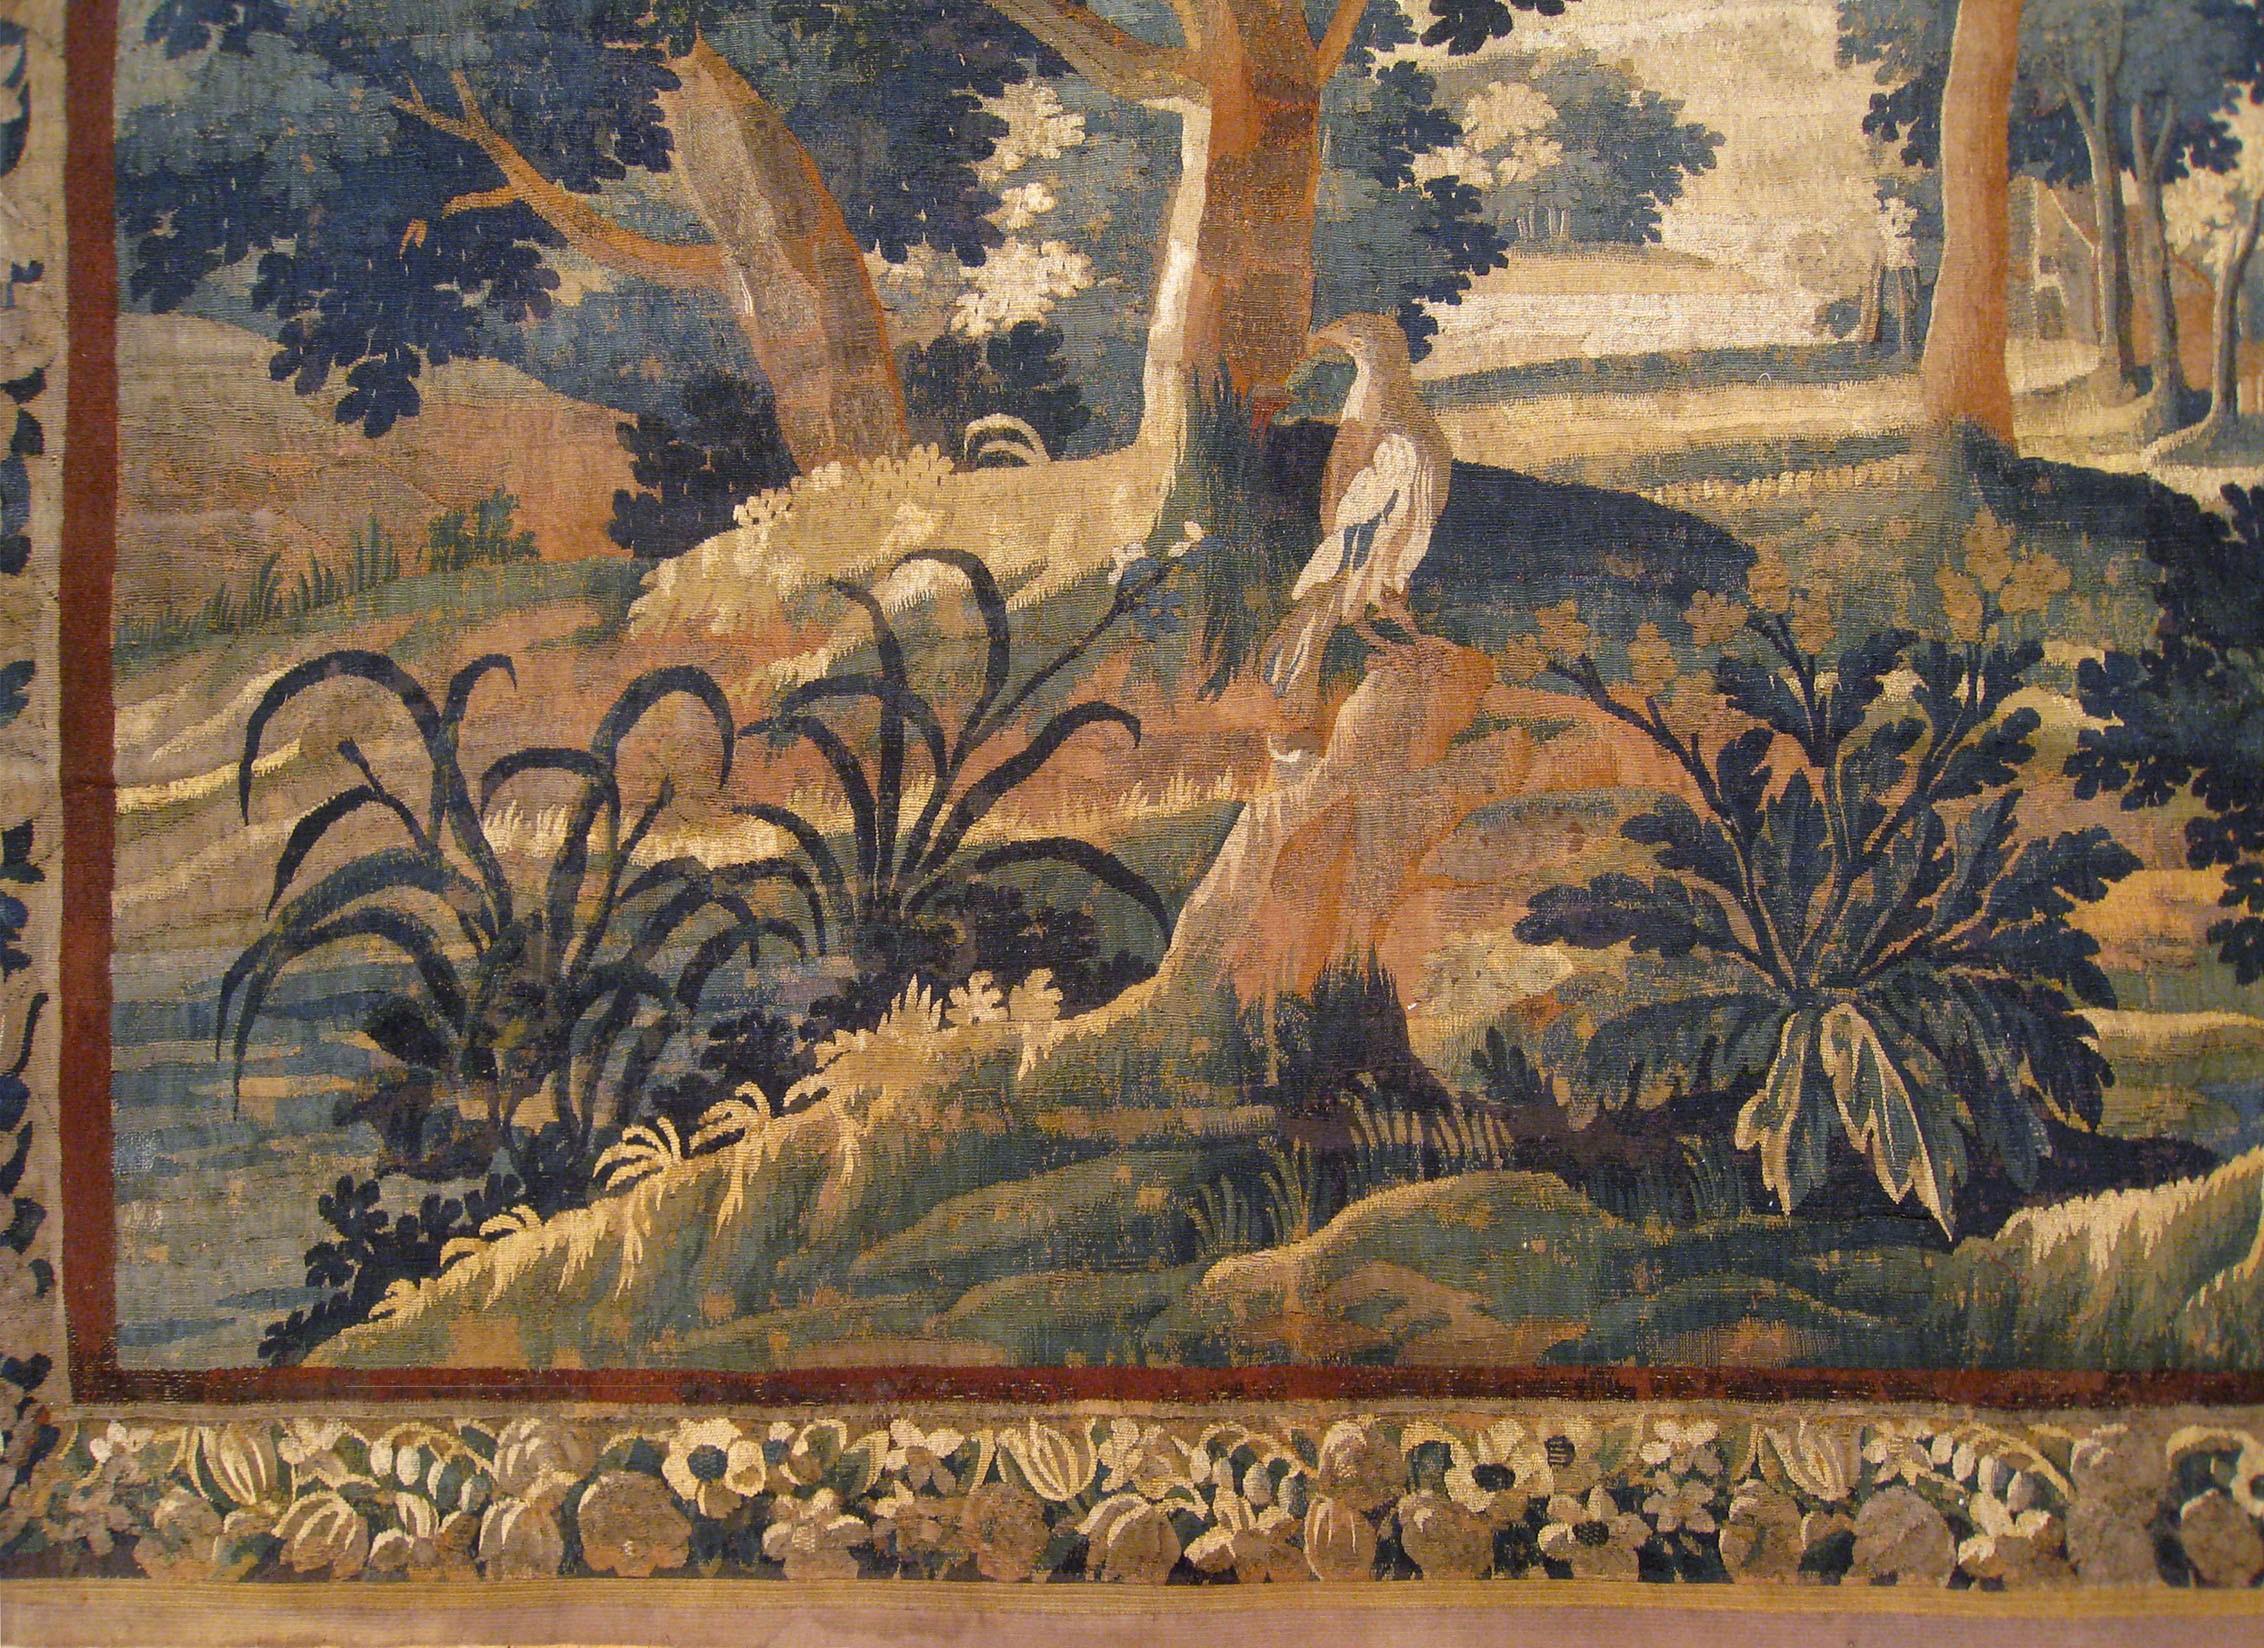 Hand-Woven 18th Century Flemish Verdure Tapestry, with a Bird in a Woodland Setting